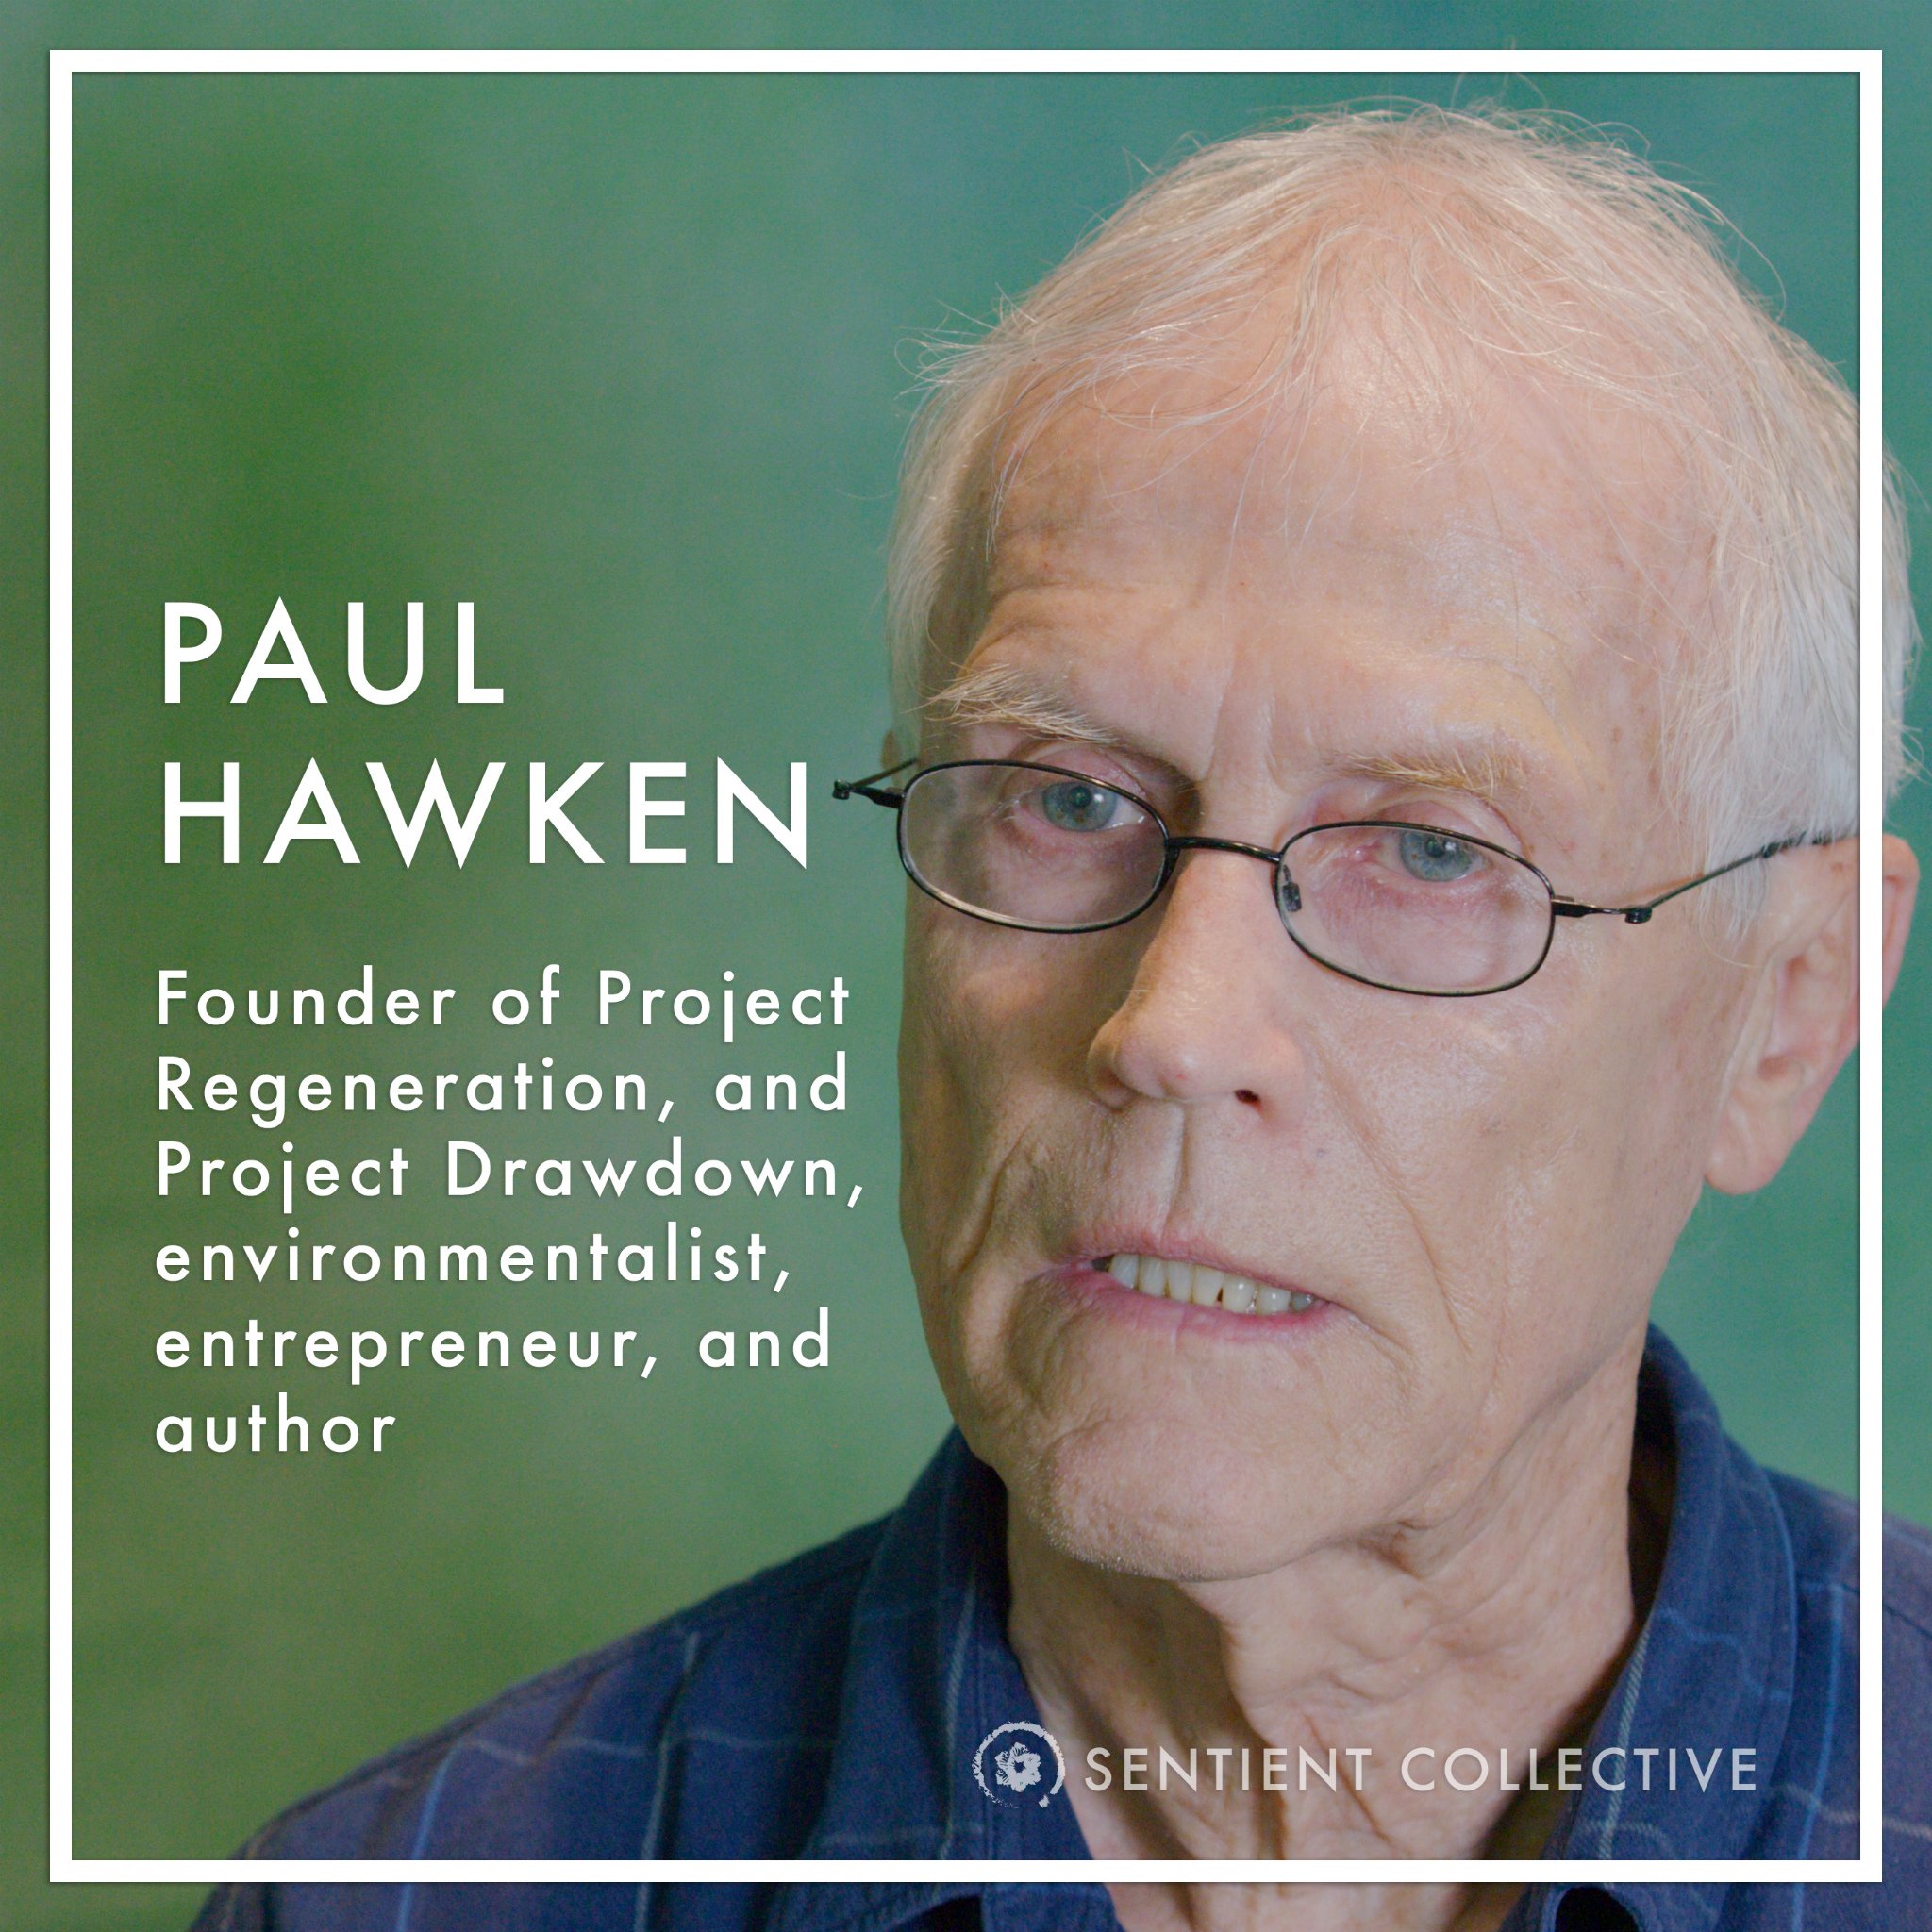 Worldview Documentary Film🎬
🆂🅴🅽🆃🅸🅴🅽🆃
.
Cast Intro:
𝗣𝗮𝘂𝗹 𝗛𝗮𝘄𝗸𝗲𝗻 @paulhawken 
Environmentalist, entrepreneur, consultant and author
.
Born and raised in California, he pursued education at UC Berkeley and San Francisco State Universi